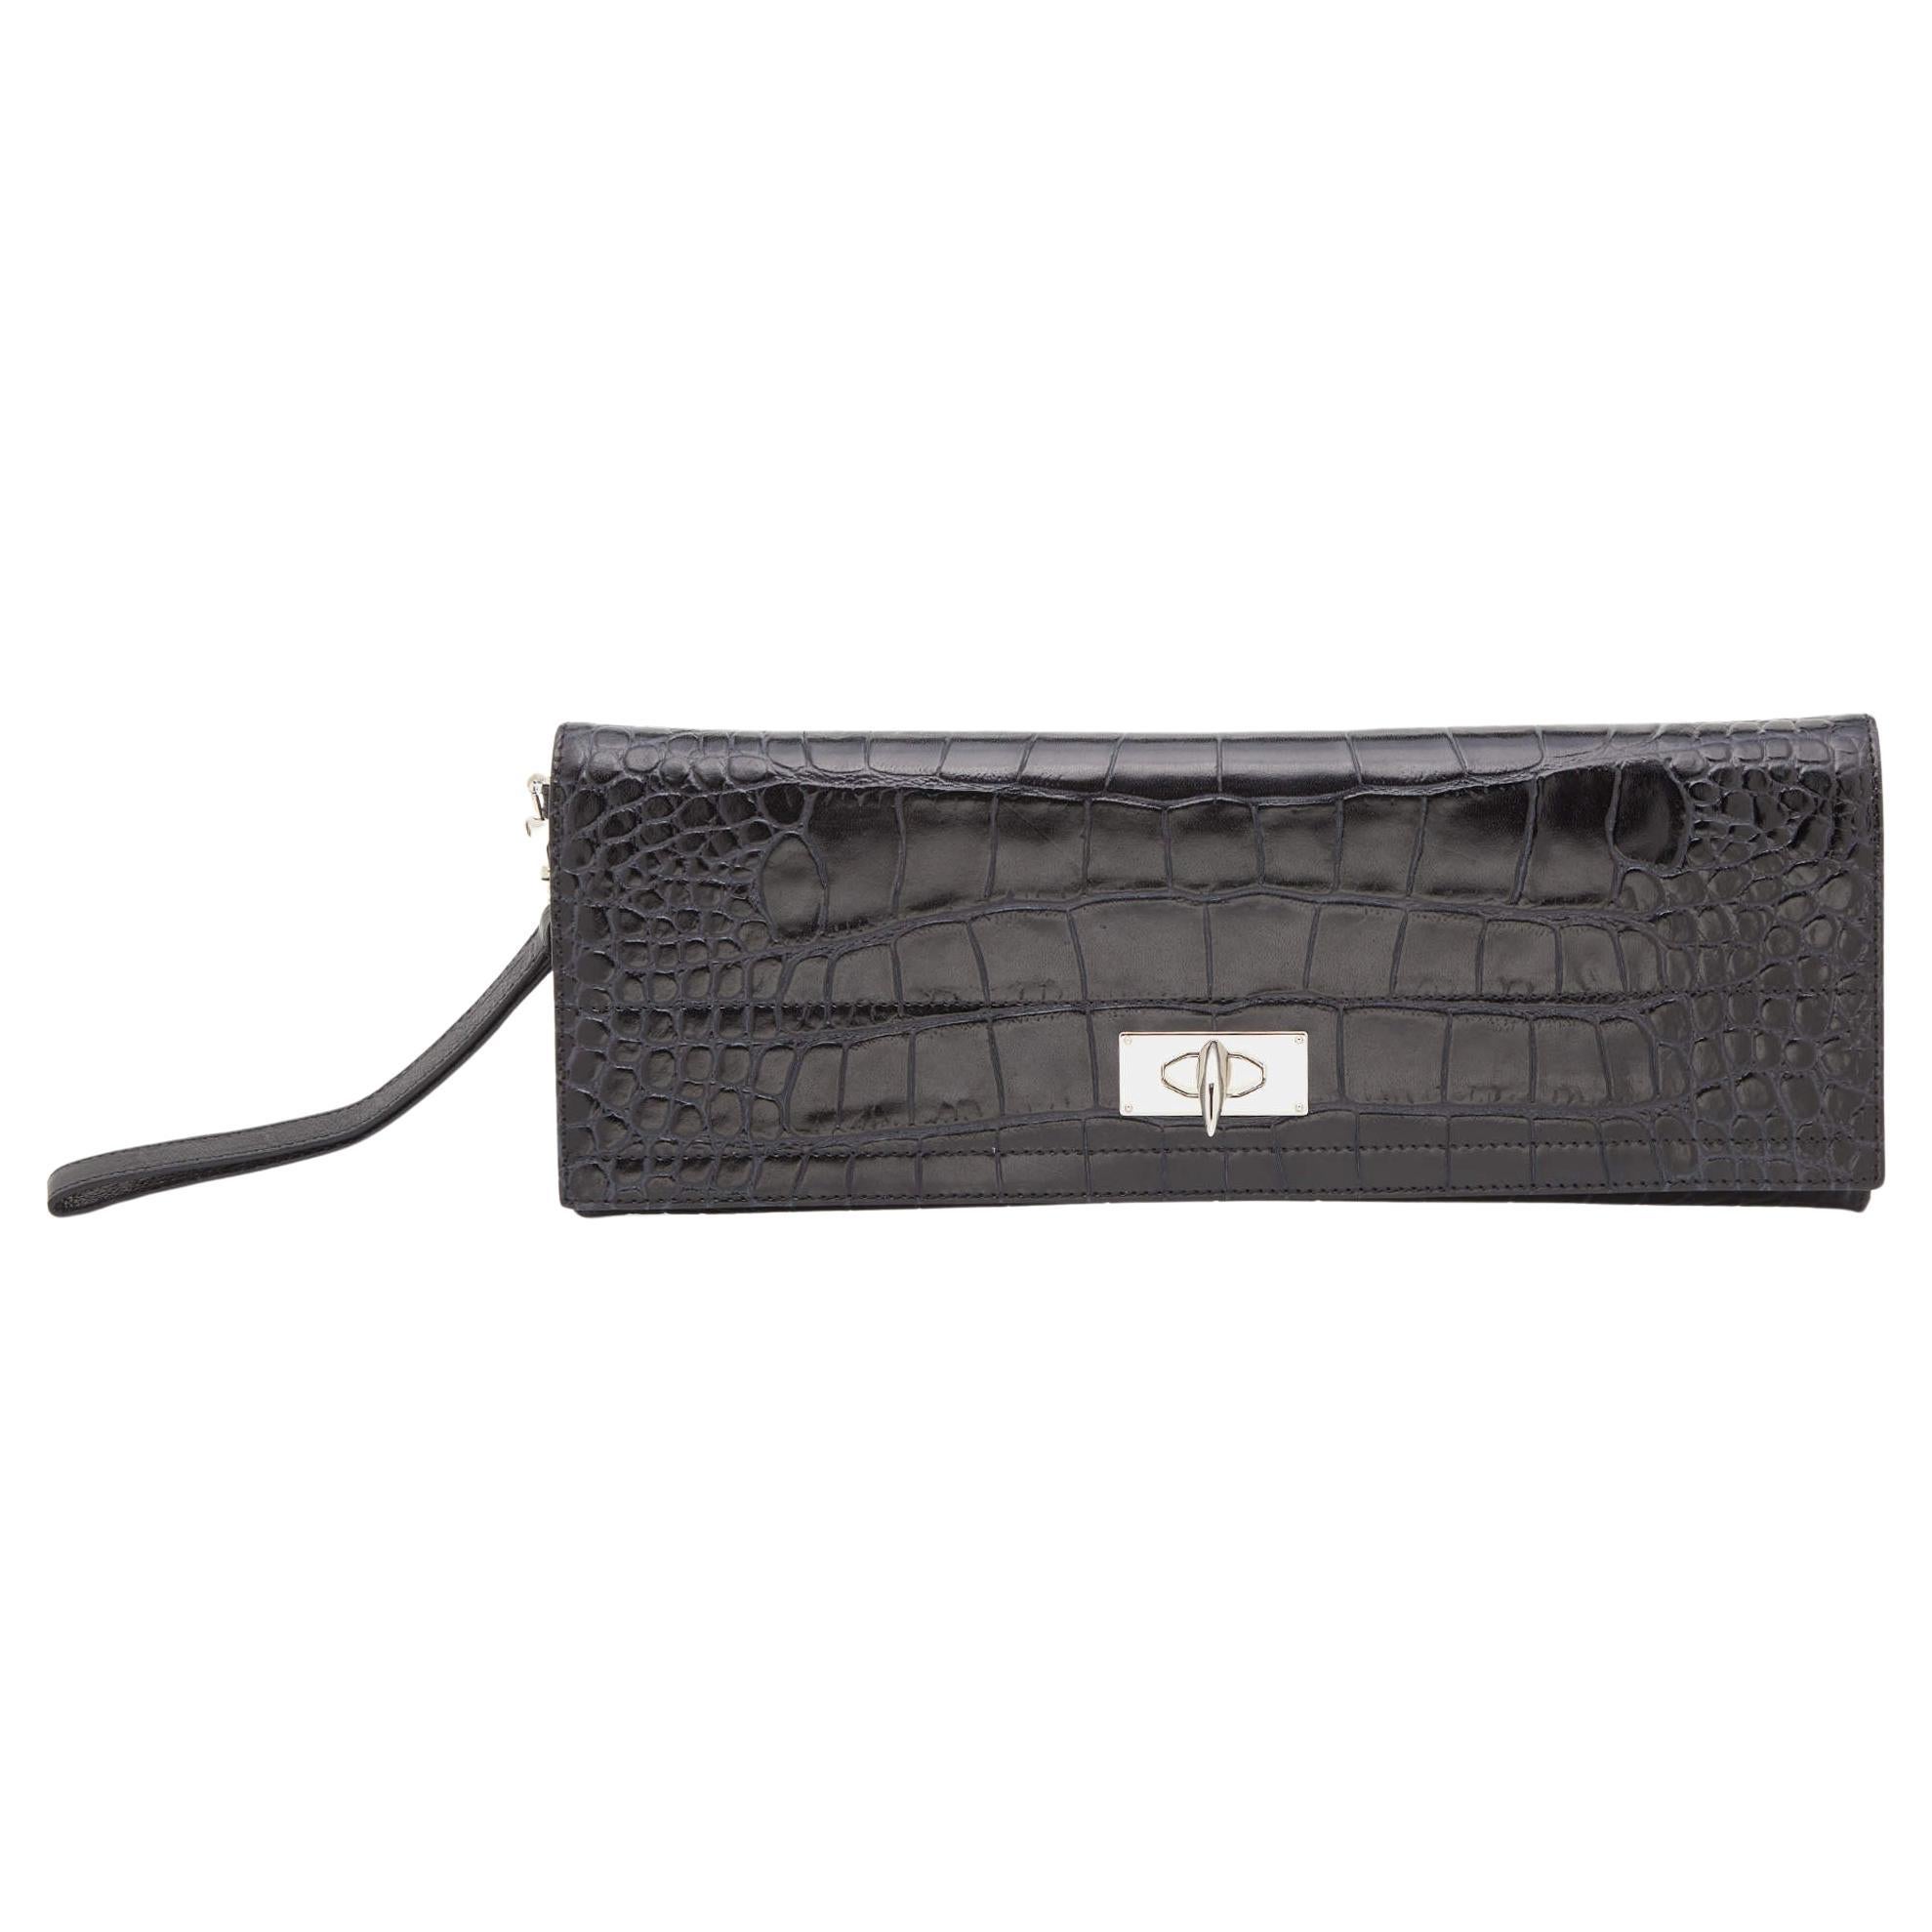 Givenchy Black Croc Embossed Leather Shark Tooth Long Wristlet Clutch